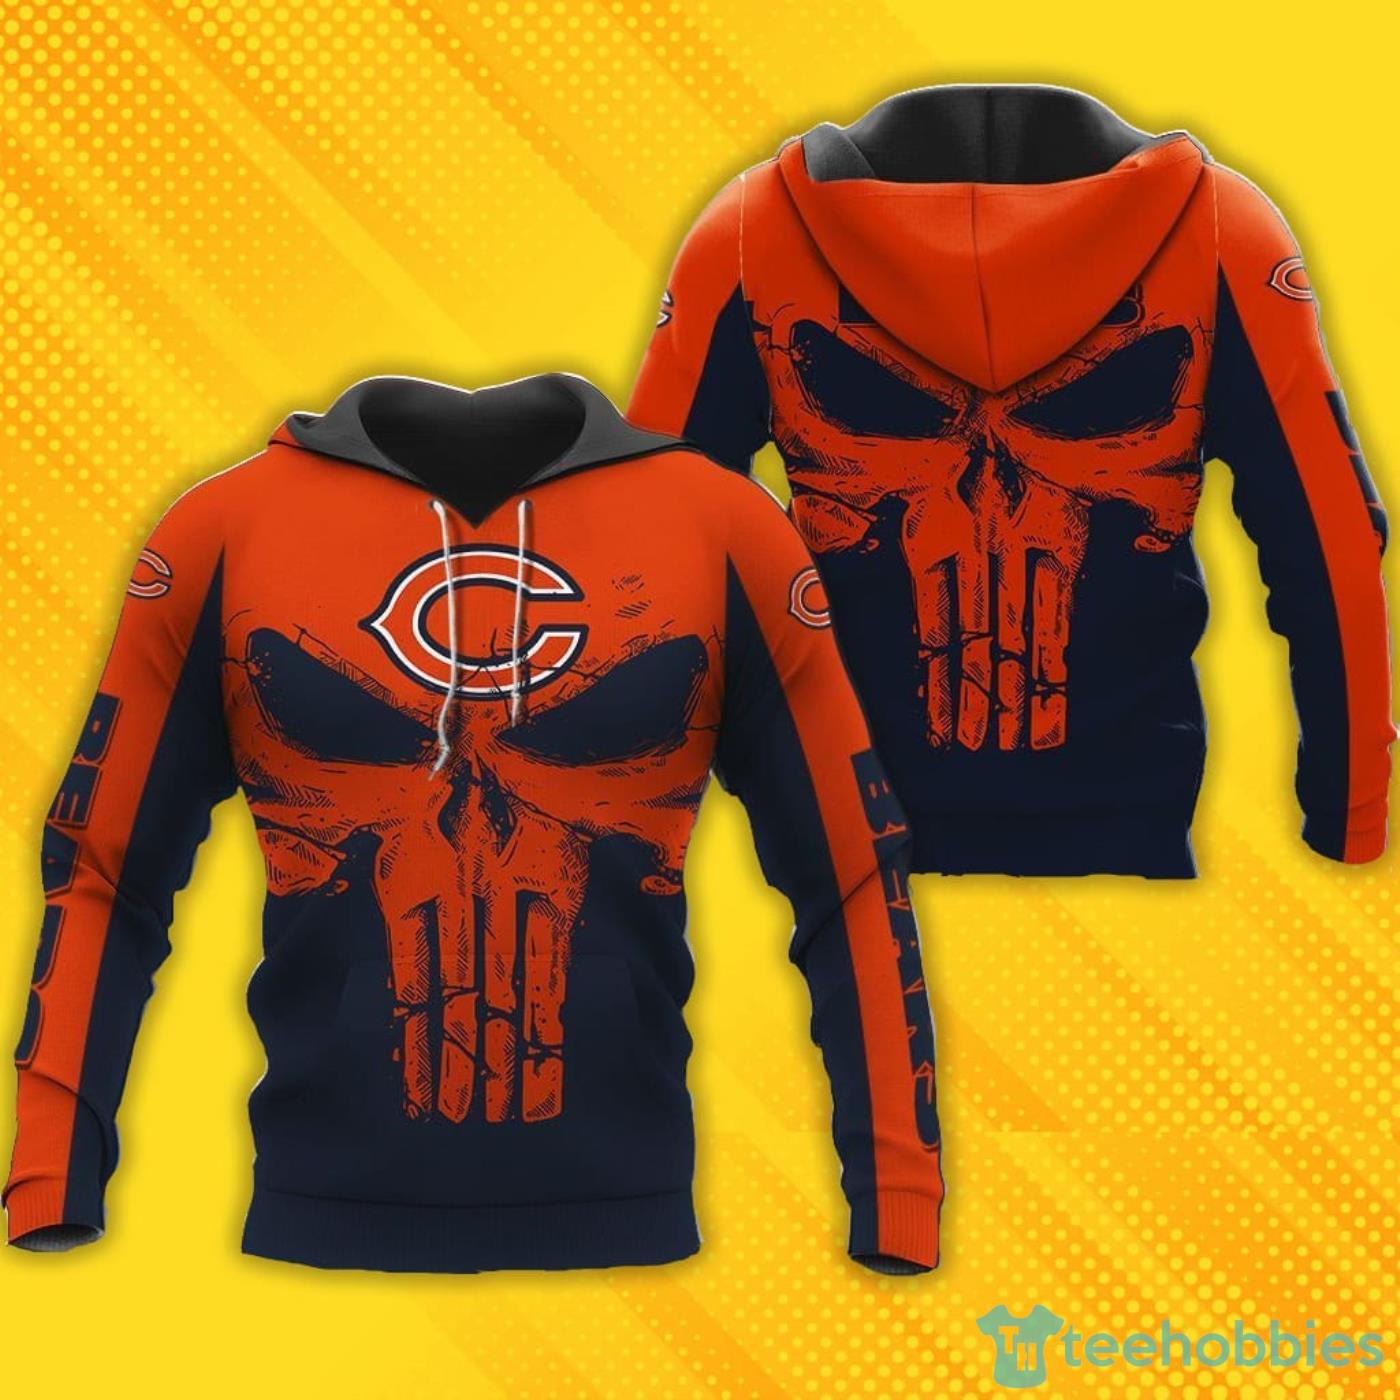 Chicago Bears Punisher Skull 3D All Over Printed Shirt Product Photo 1